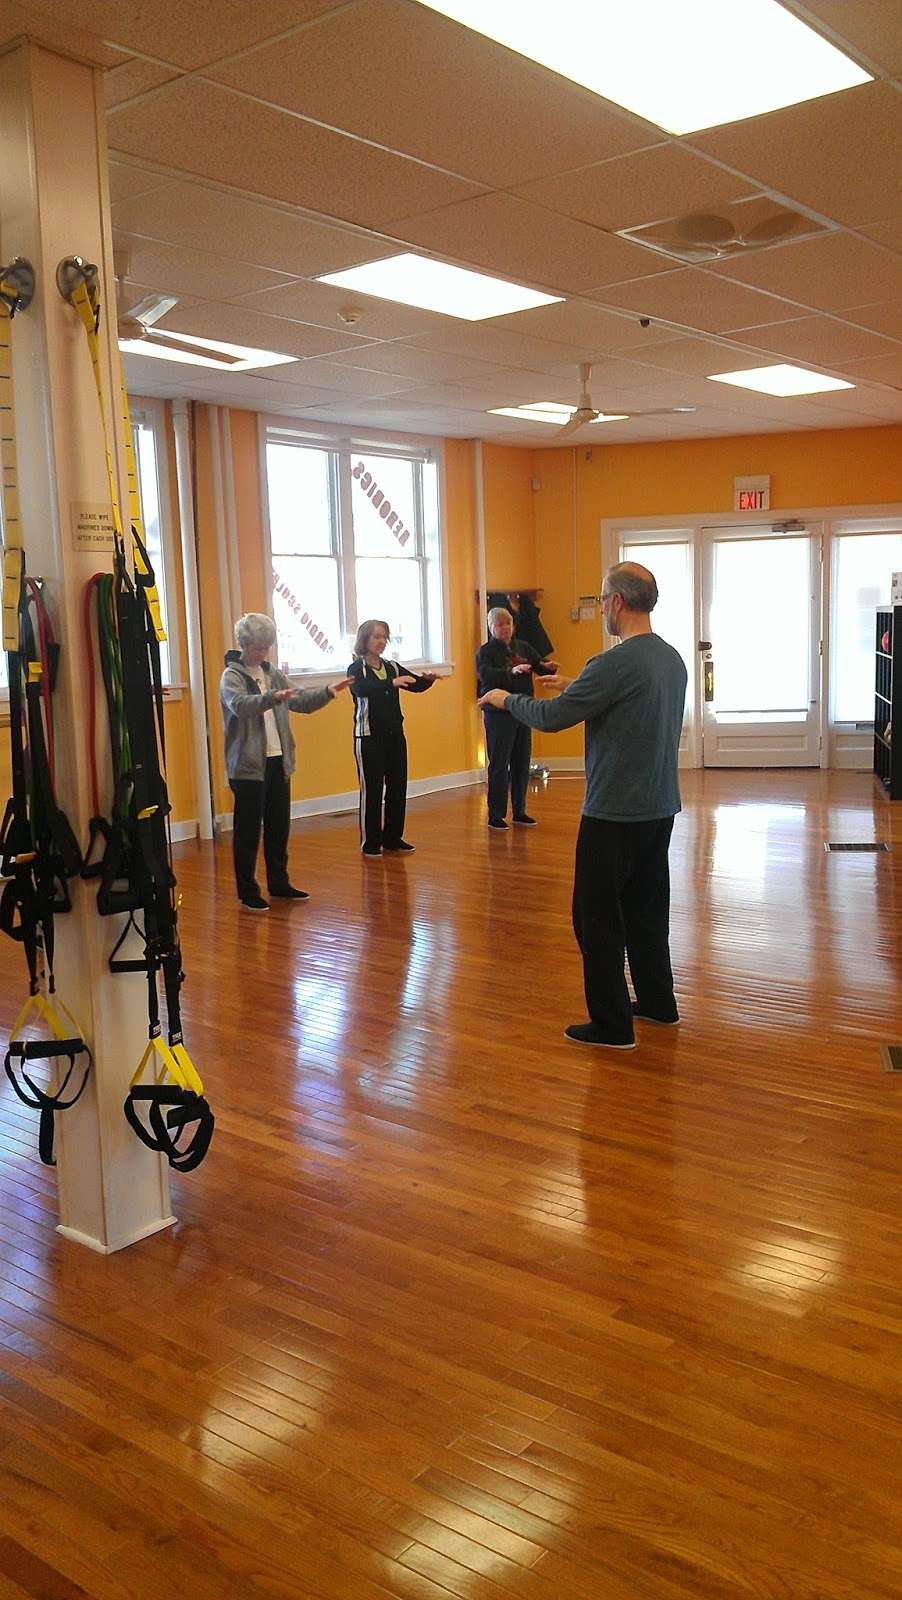 Taichi Qigong Health | 201 Broadway Westville Square Bldg., Room 2A Parking in rear of building, Westville, NJ 08093, USA | Phone: (609) 439-3316